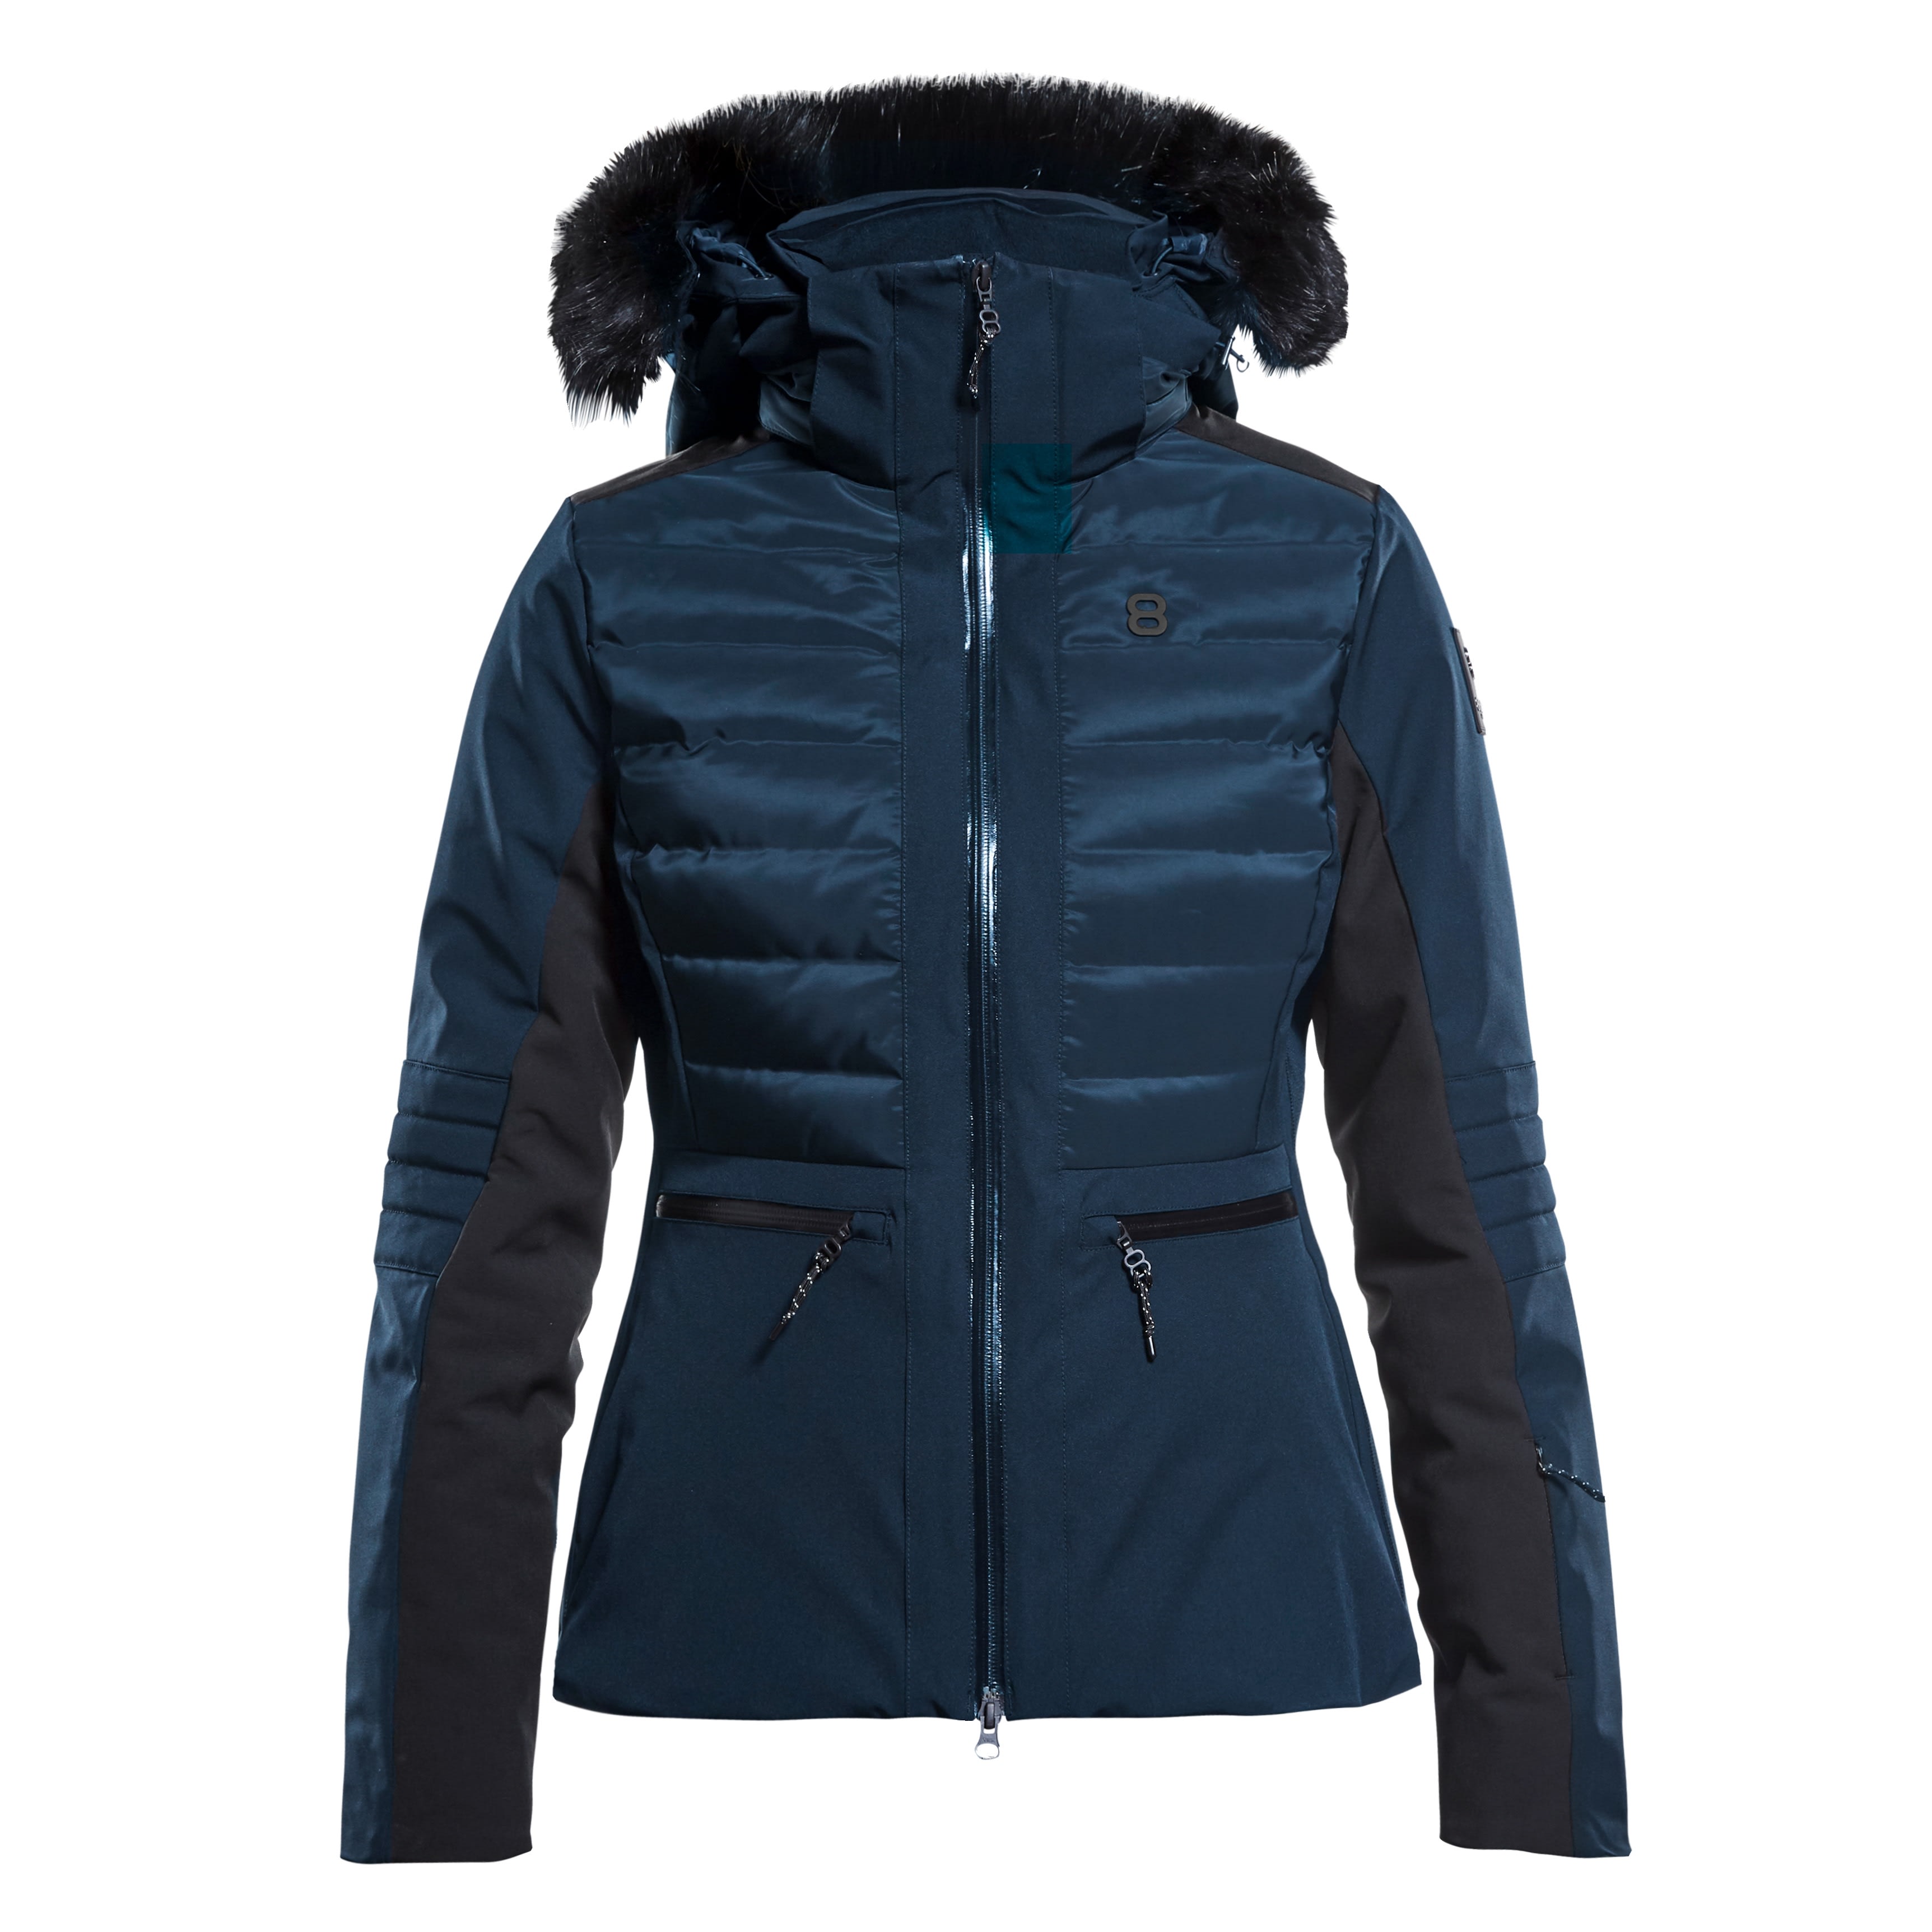 Buy 8848 Altitude Cristal Jacket from Outnorth